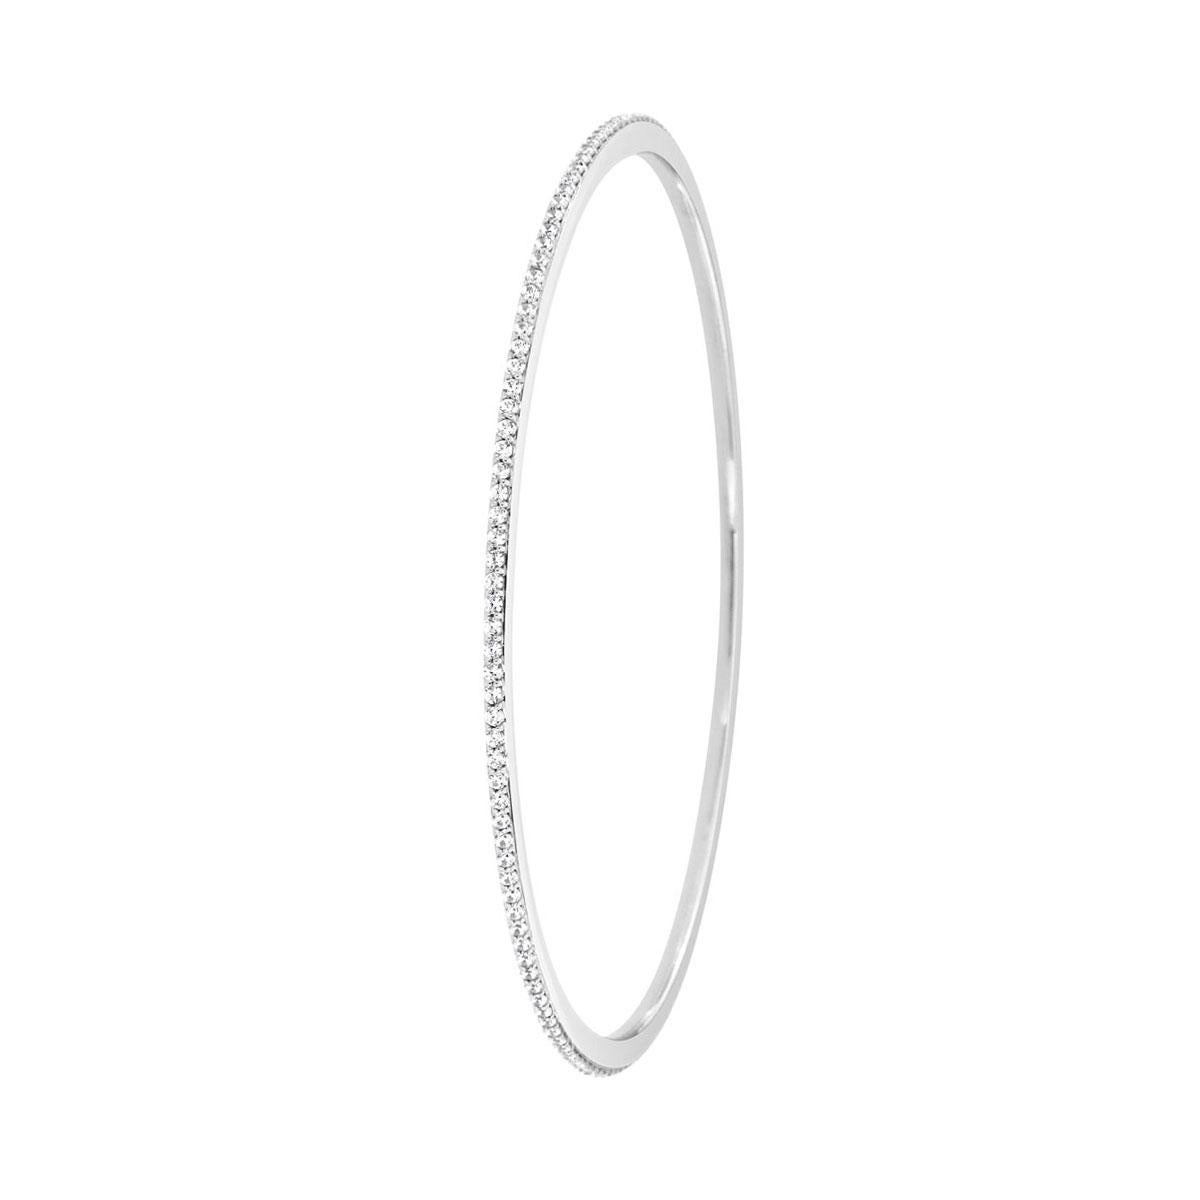 This petite eternity bangle bracelet features round brilliant diamonds Micro- Prong set. Experience the difference!

Product details: 

Center Gemstone Type: NATURAL DIAMOND
Center Gemstone Color: WHITE
Center Gemstone Shape: ROUND
Center Diamond